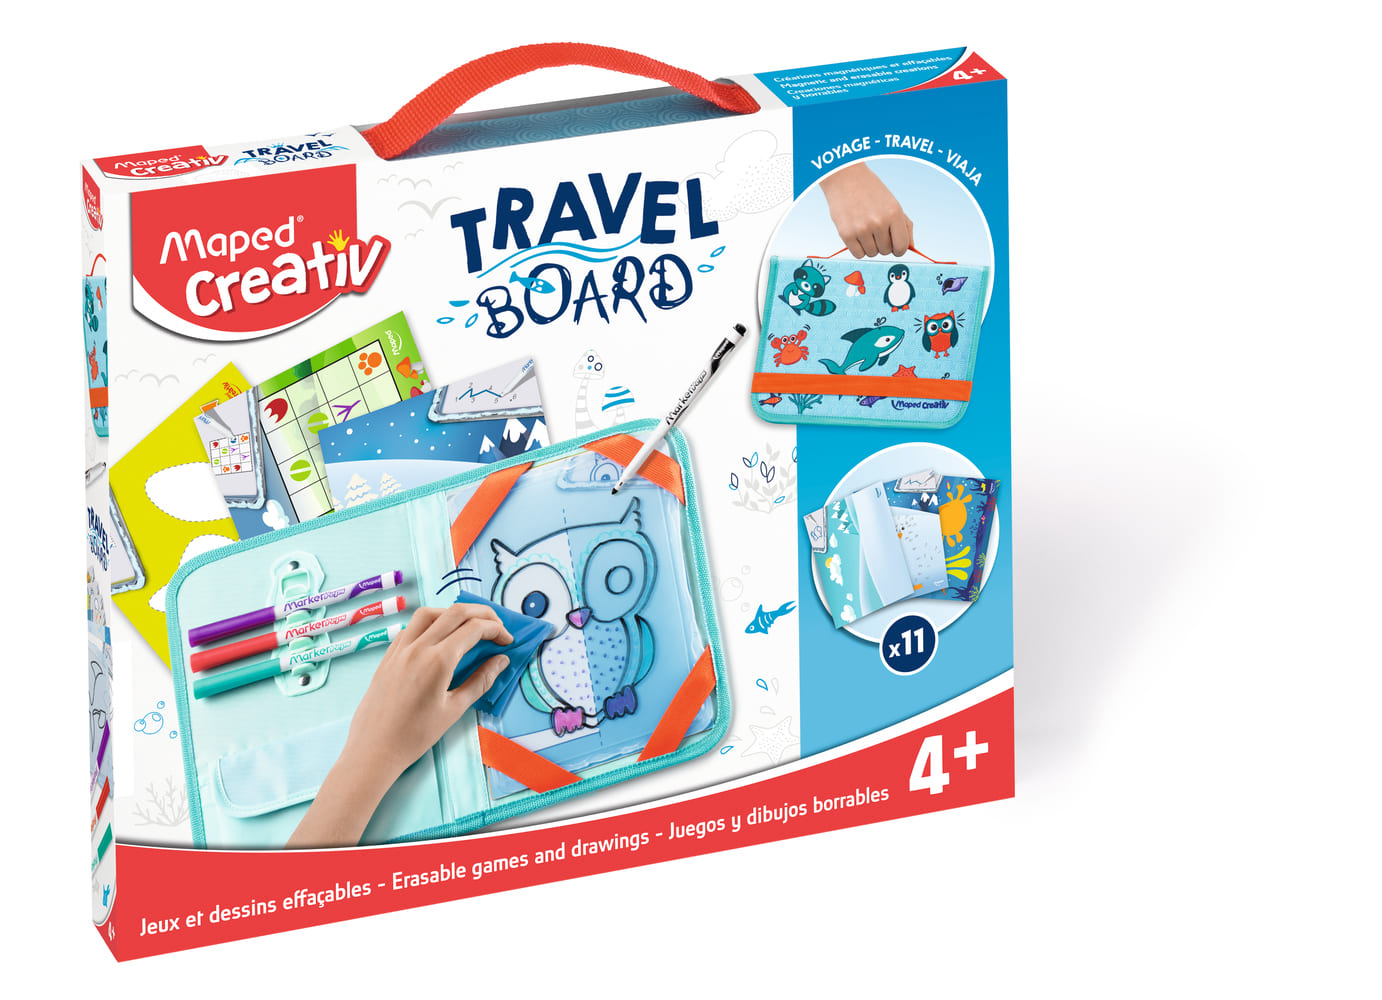 https://fr.maped.com/wp-content/uploads/sites/2/2021/08/maped-creativ-board-activities-travel-board-erasable-games-drawings-969310_r01.jpg